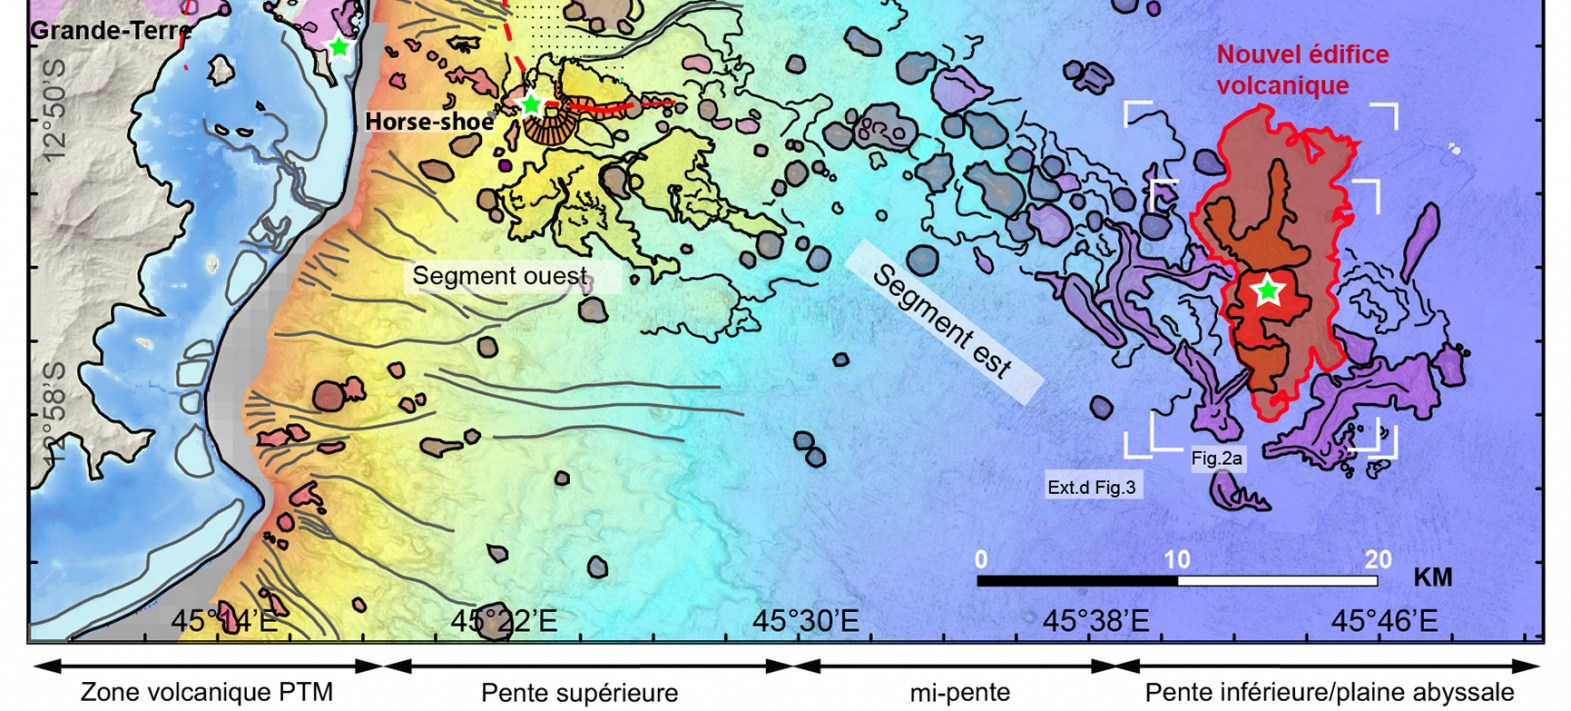 Birth of Mayotte’s undersea volcano: the largest undersea eruption ever documented